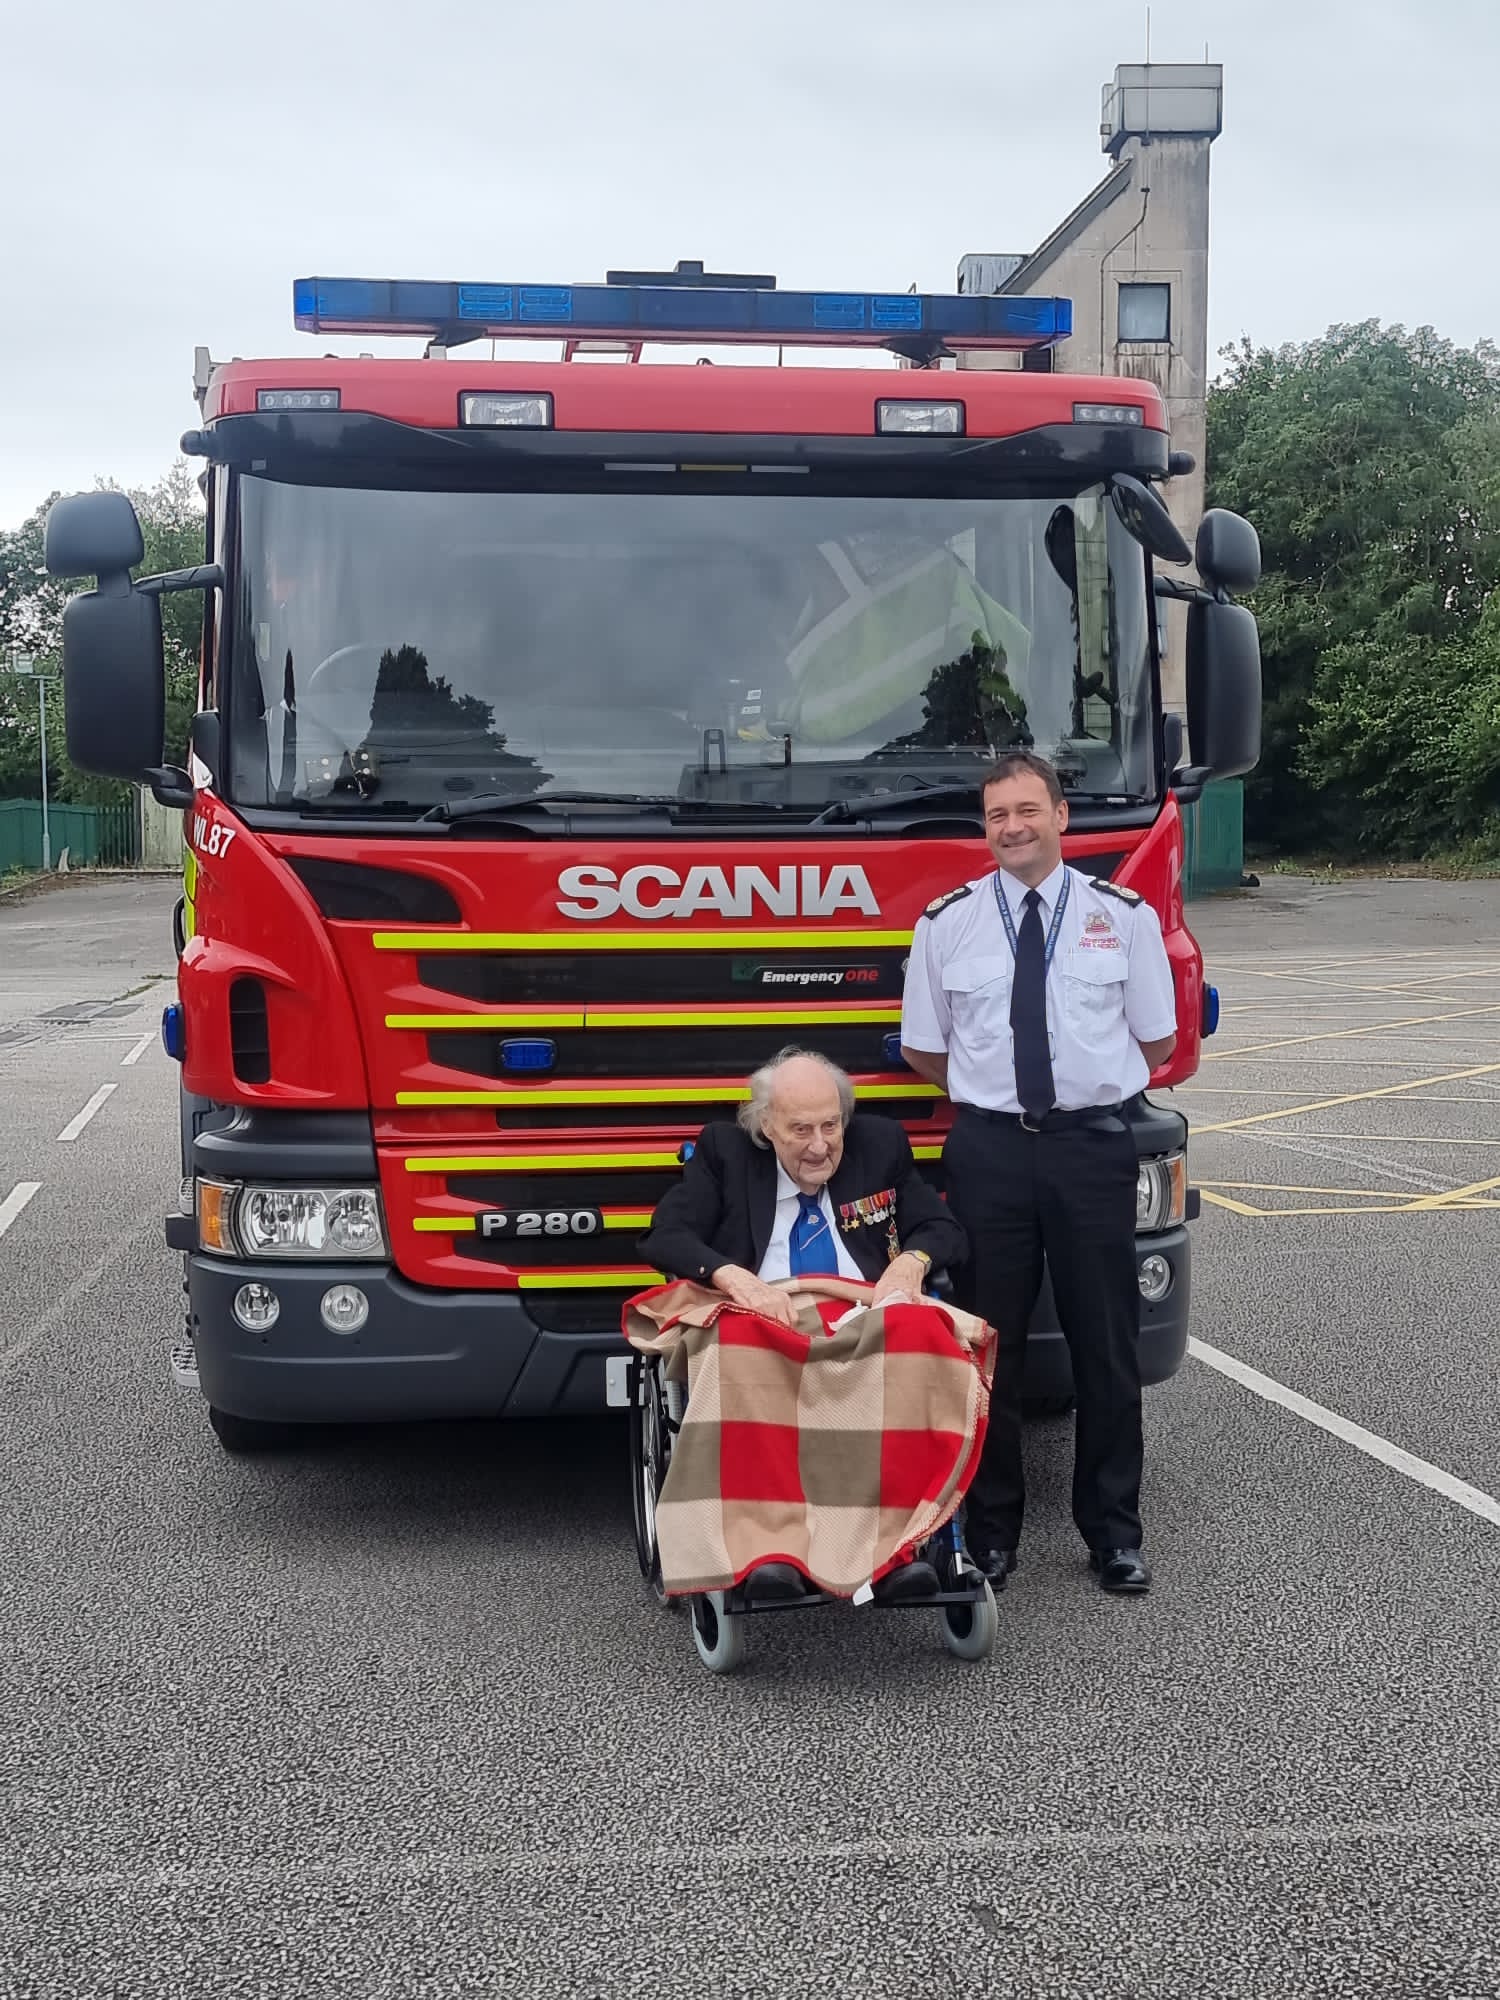 Derbyshire’s Chief Fire Officer and Chief Executive Gavin Tomlinson welcome 98-year-old Thomas Watkins welcomes 98-year-old Thomas Watkins